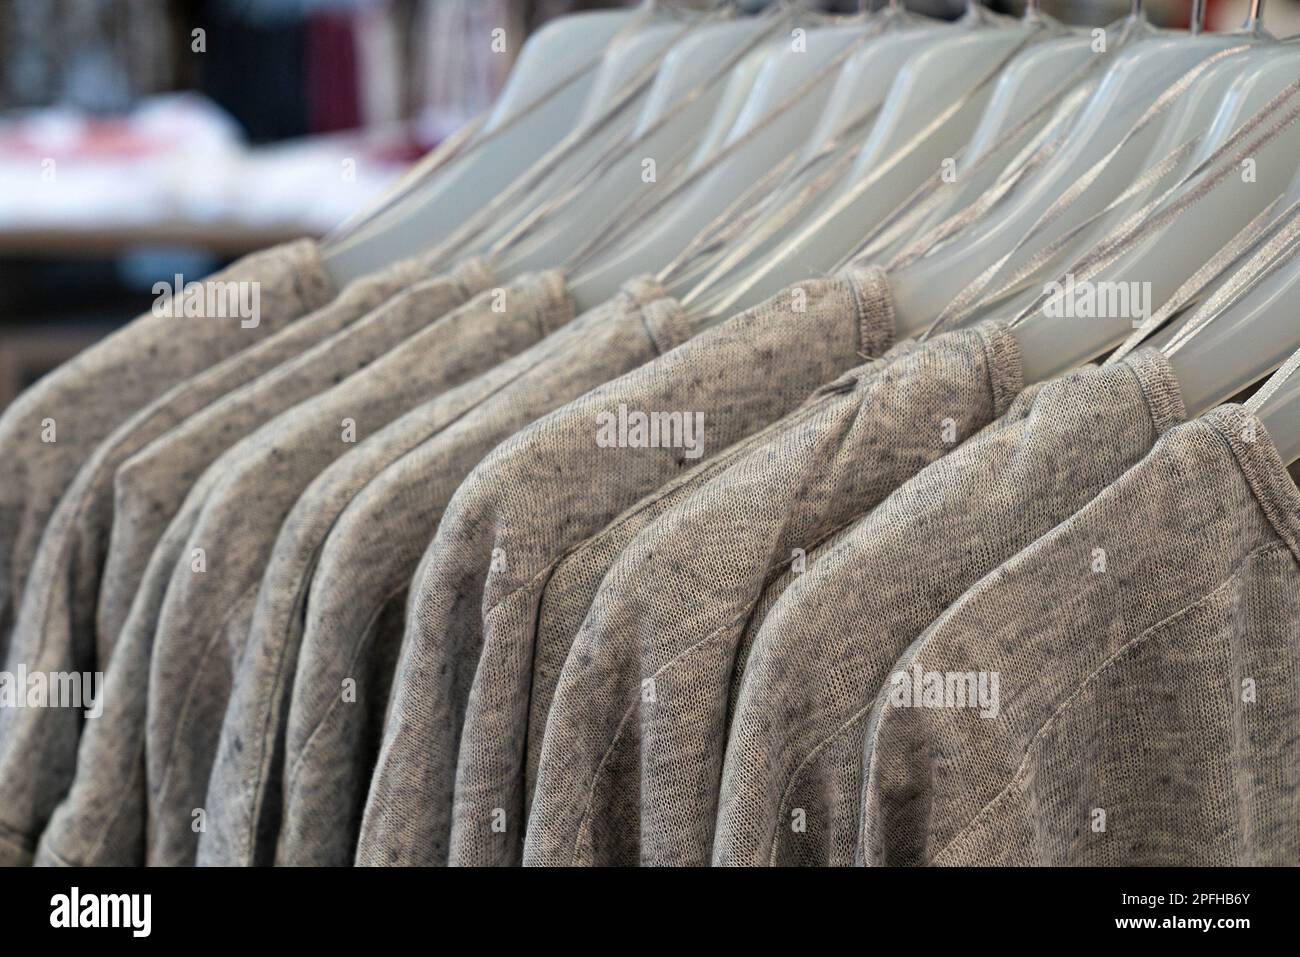 Fashion Women Clothes Hanging On Plastic Hangers In Clothing Store Department Store. Closeup. Casual wear. Stock Photo